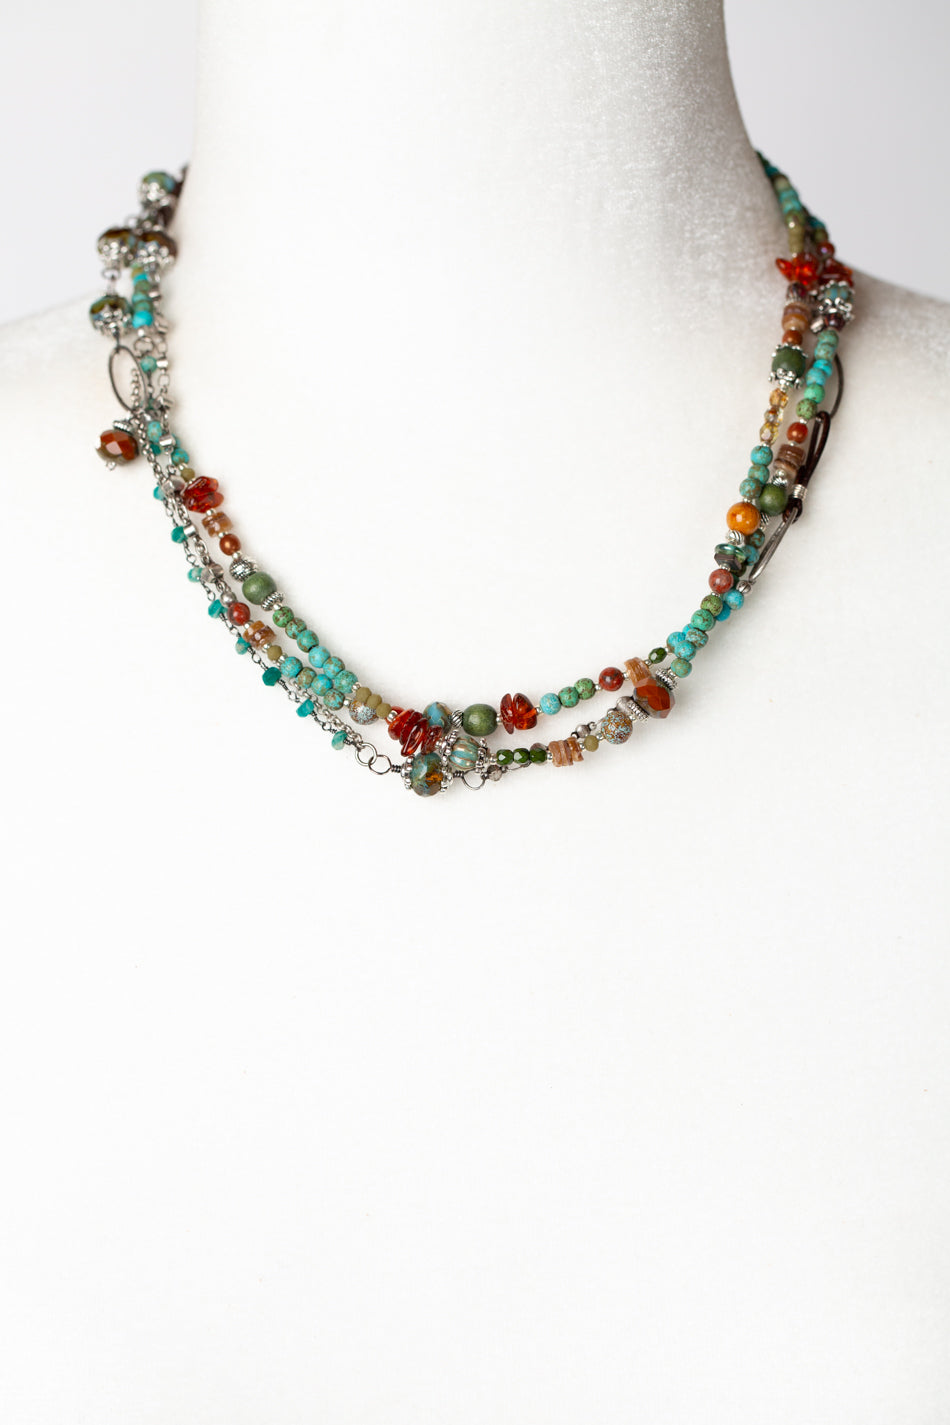 Lakeside 57.5-59.5" Turquoise, Jasper, Czech Glass Collage Necklace